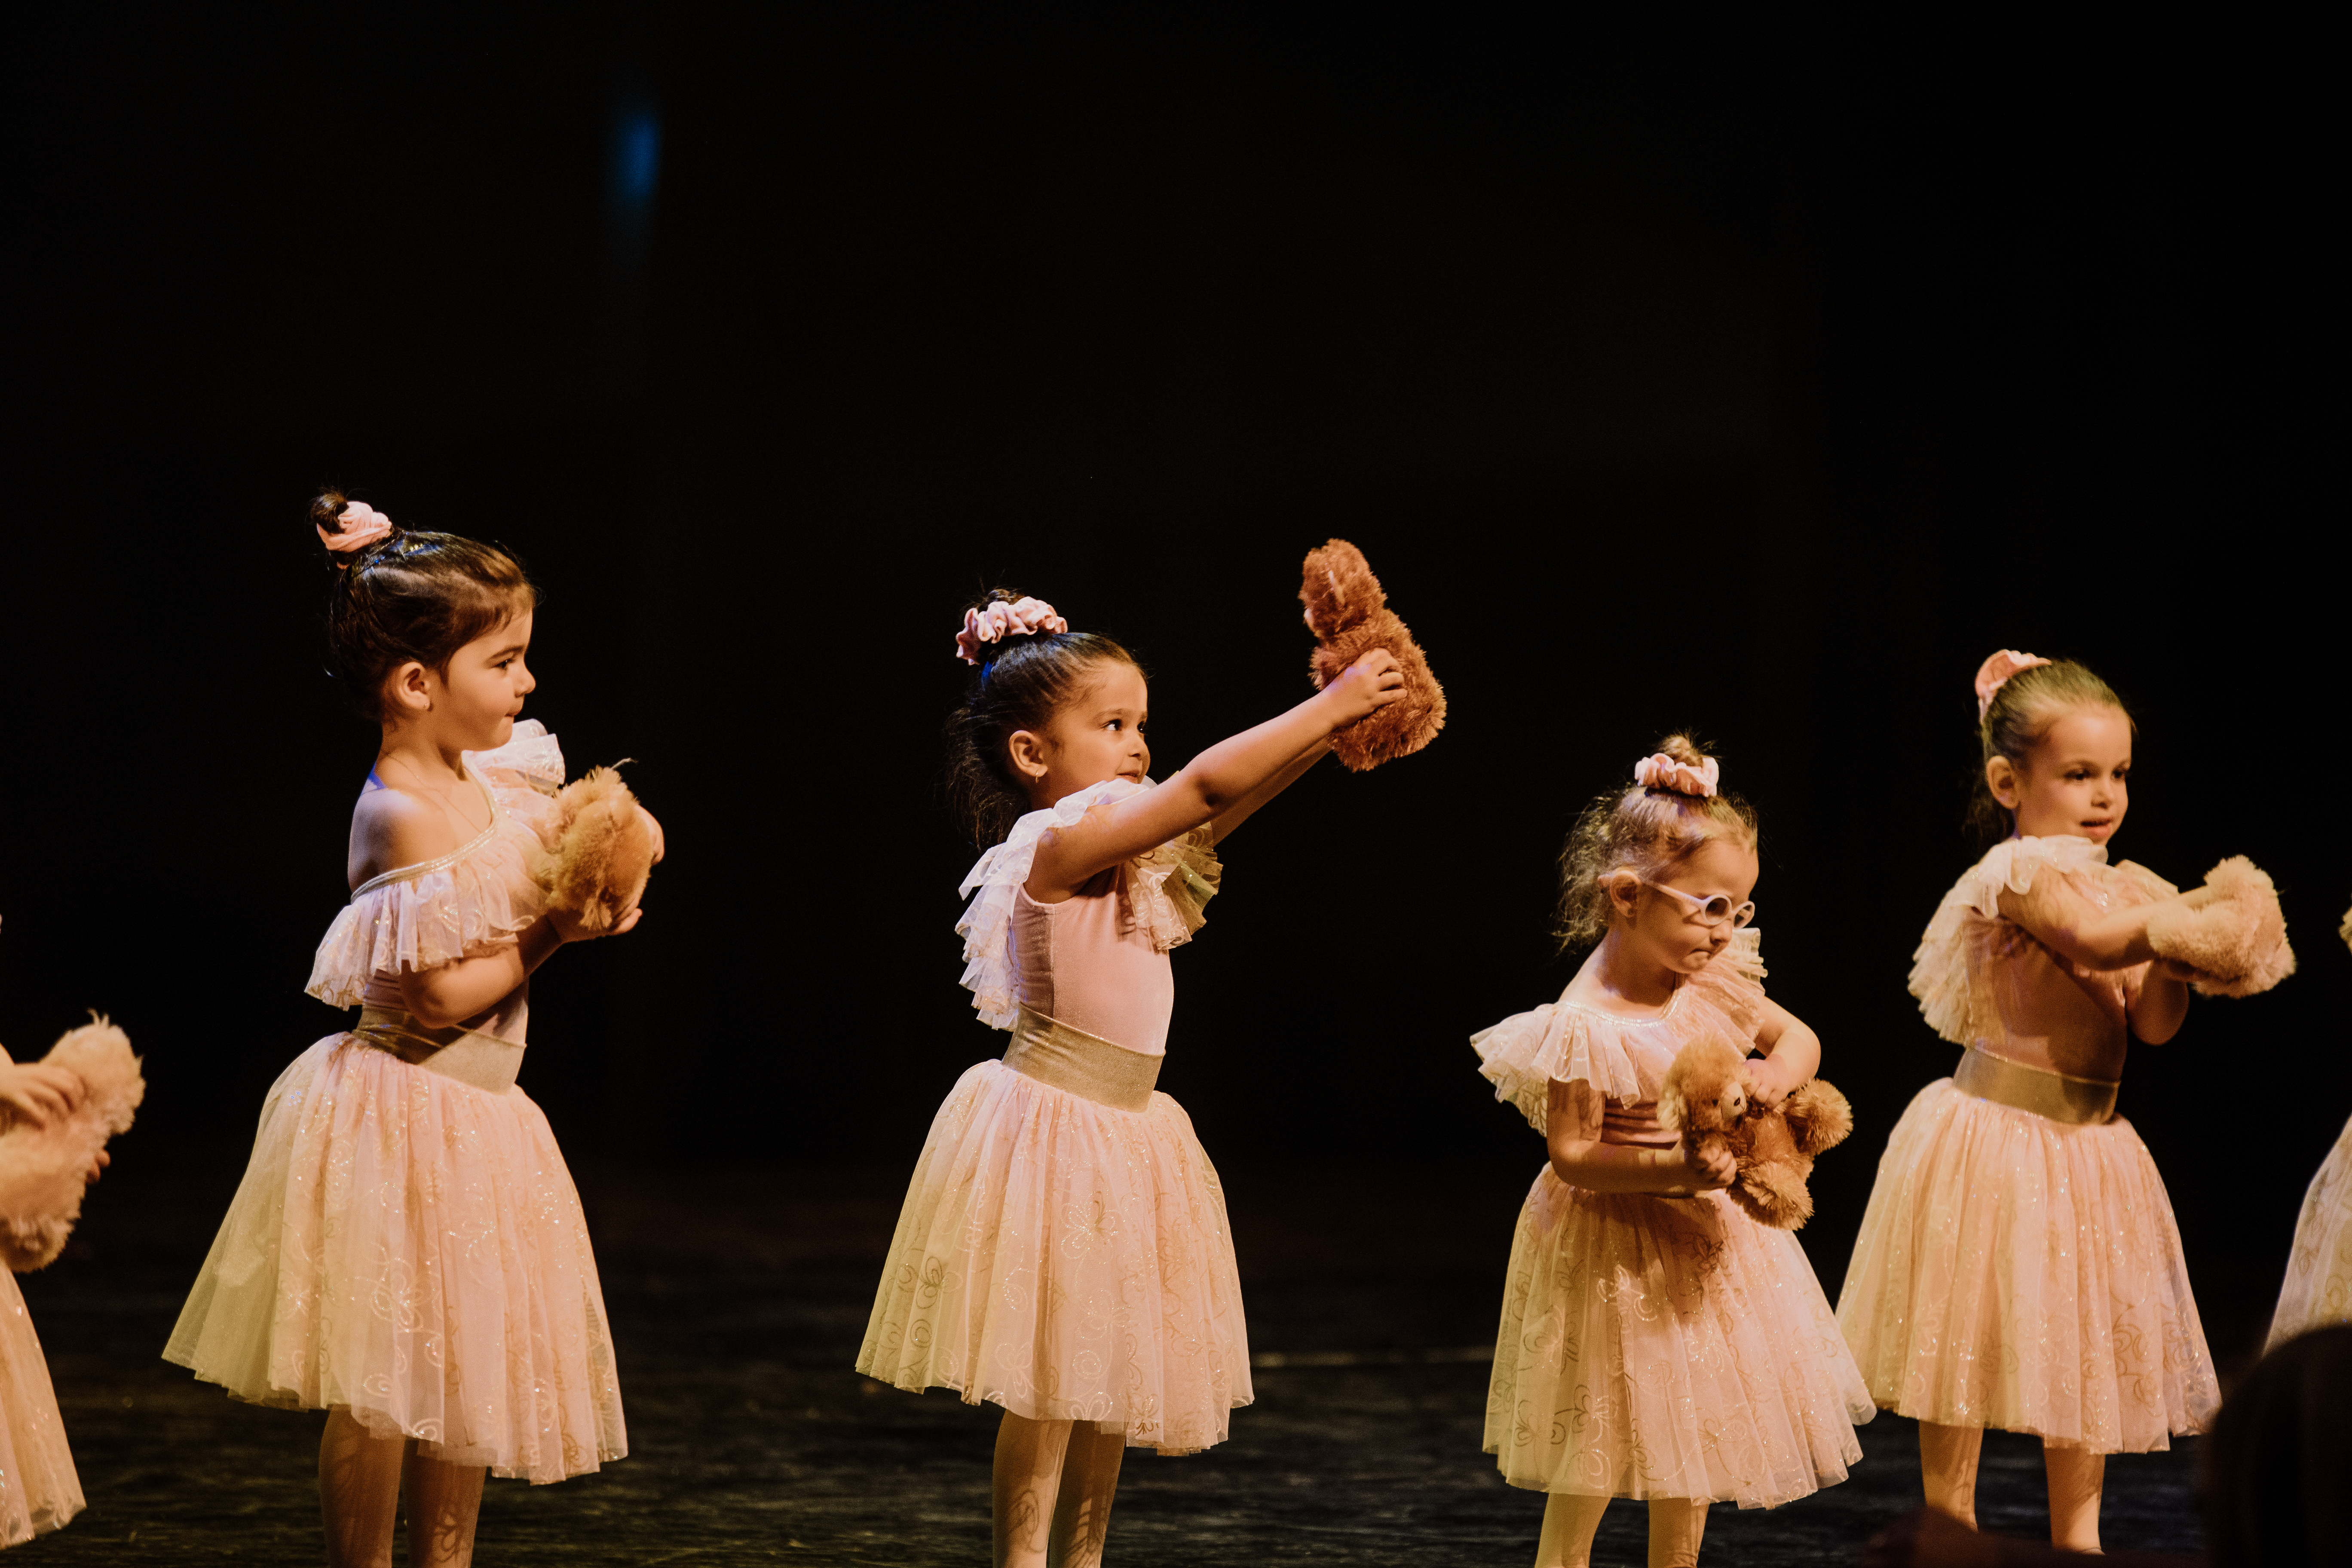 Four dancers holding teddy bears on stage during a ballet routine